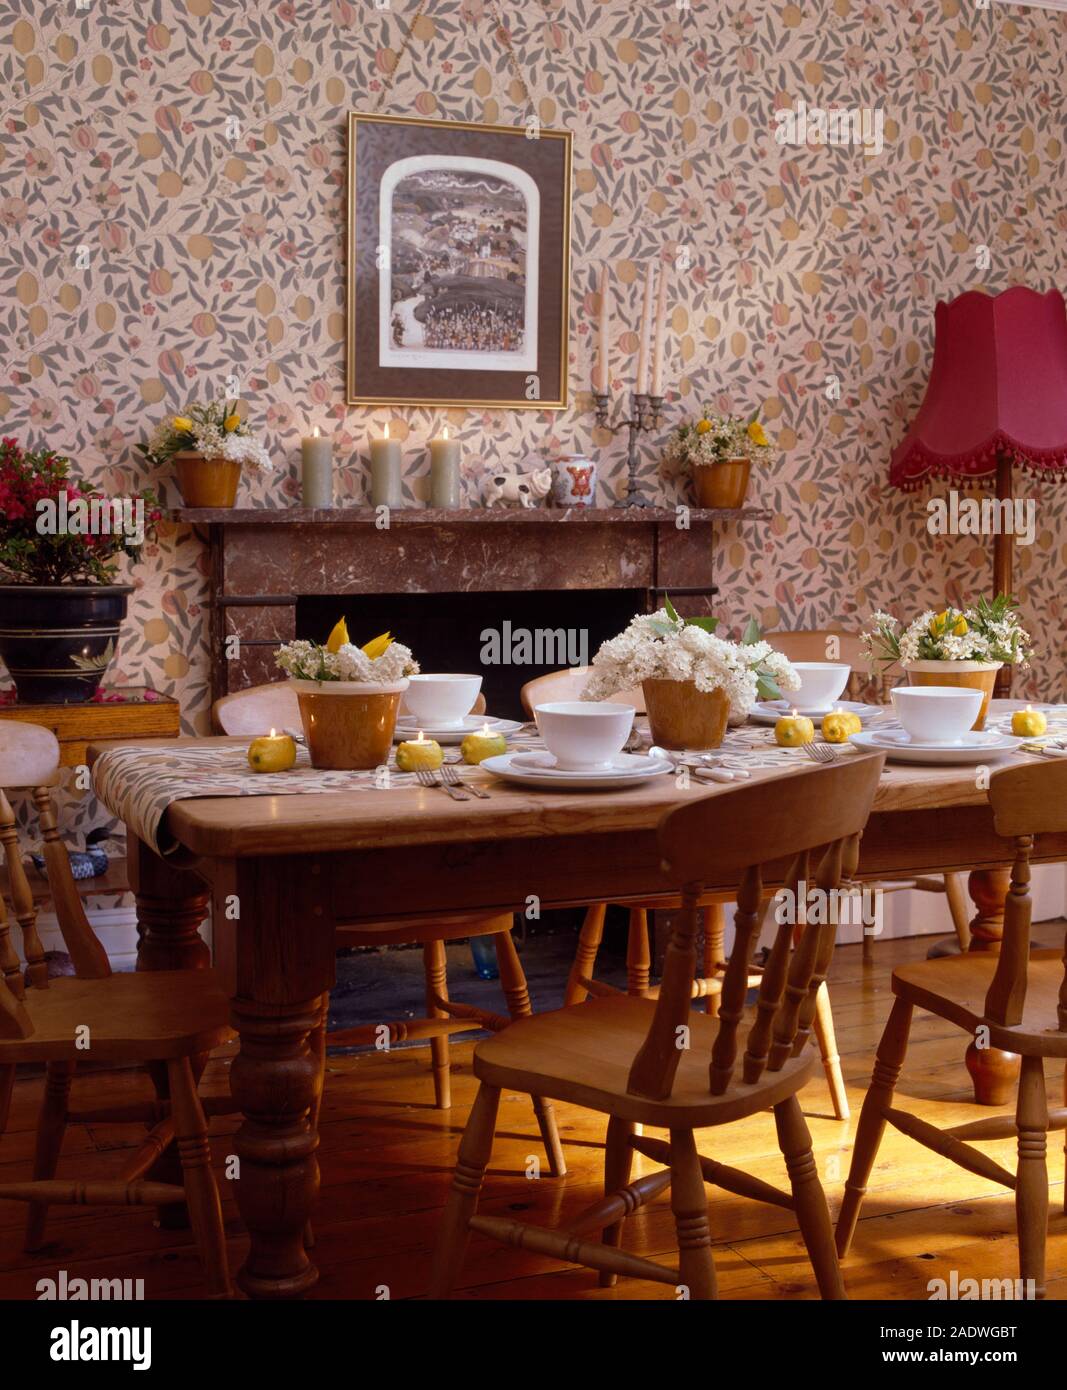 Pine chairs and table set for lunch in a traditional dining room with fruit  patterned wallpaper Stock Photo - Alamy